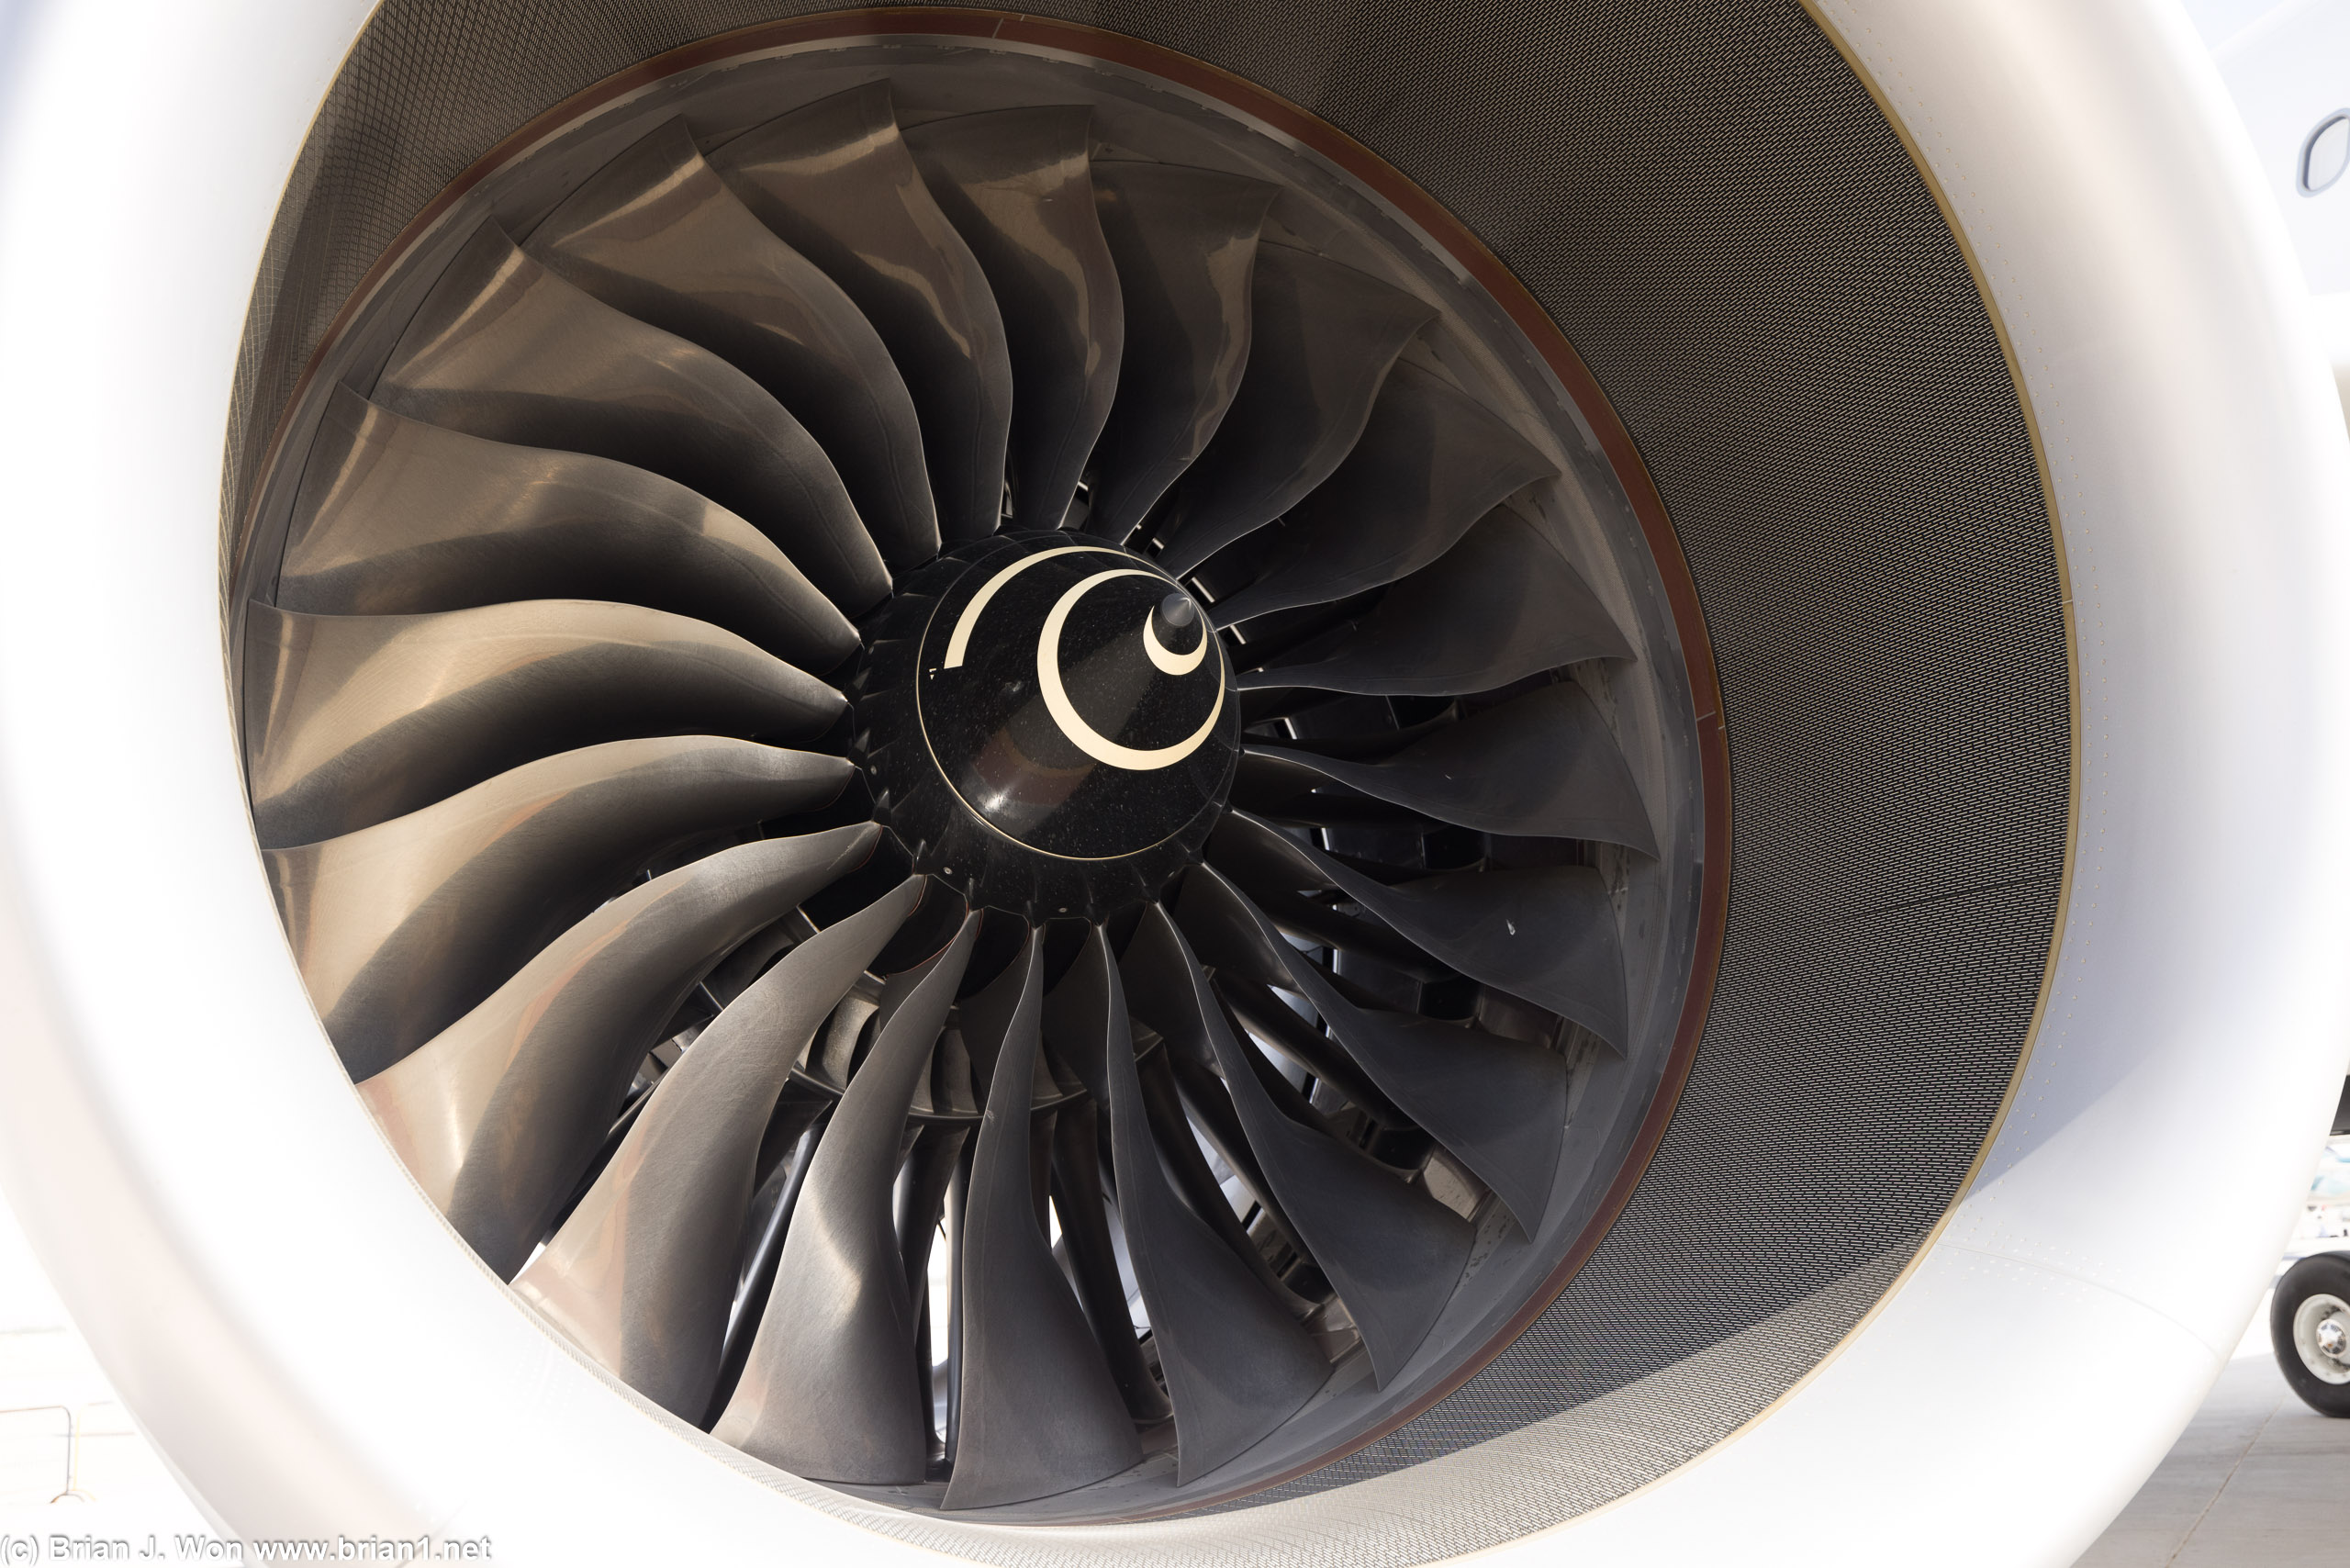 Rolls-Royce Trent 7000 on an Airbus A330-800neo.